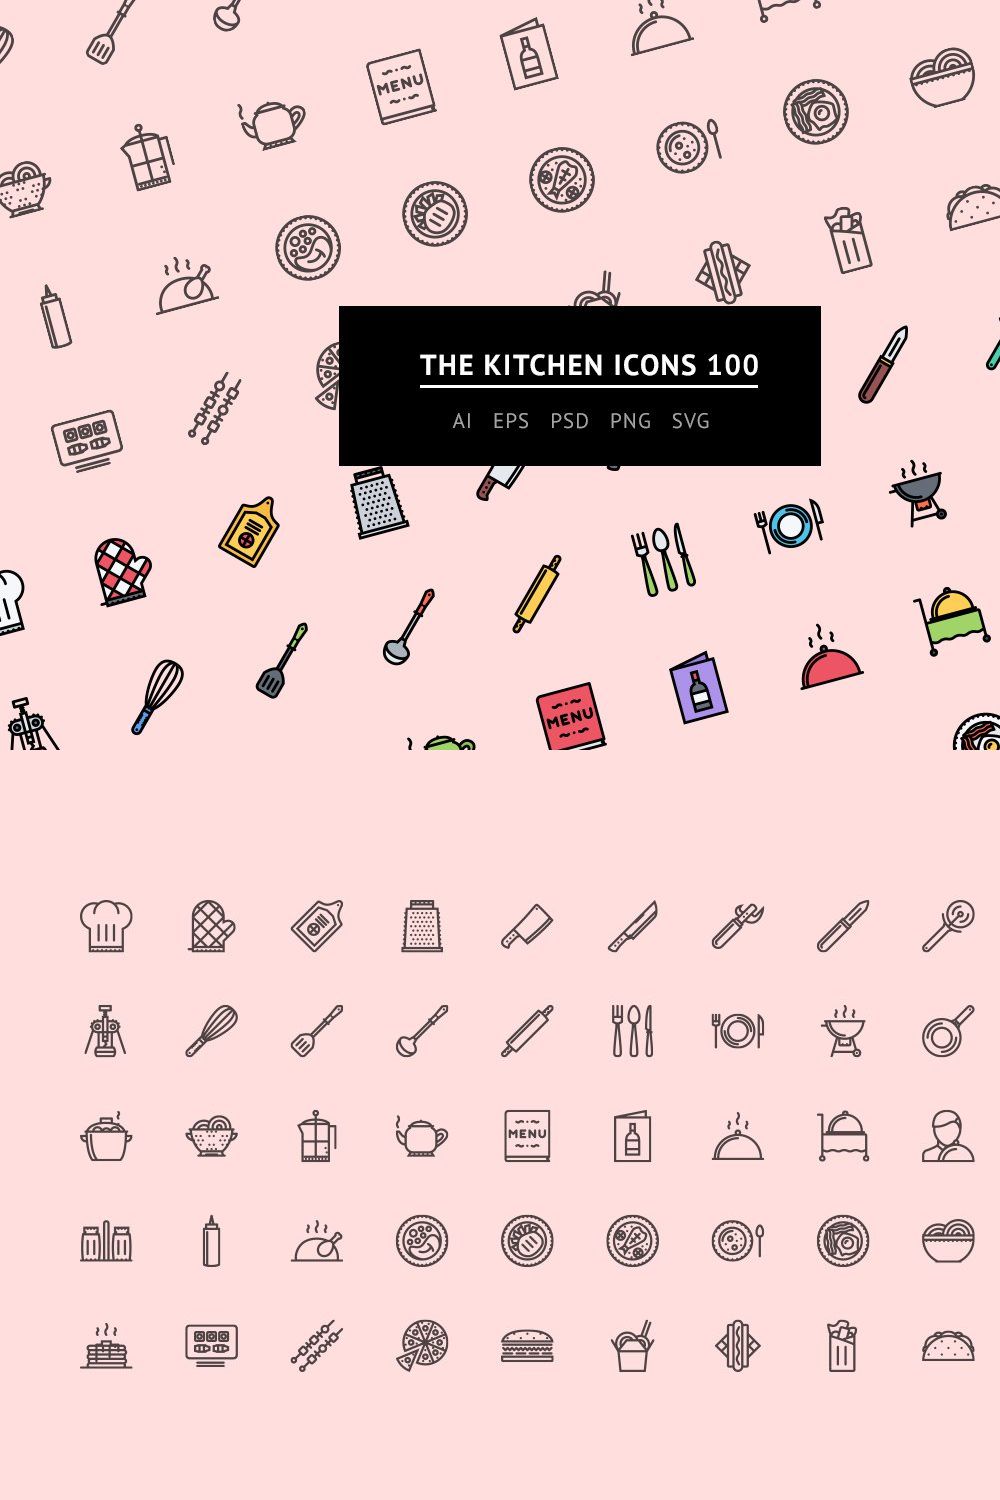 The Kitchen Icons 100 pinterest preview image.